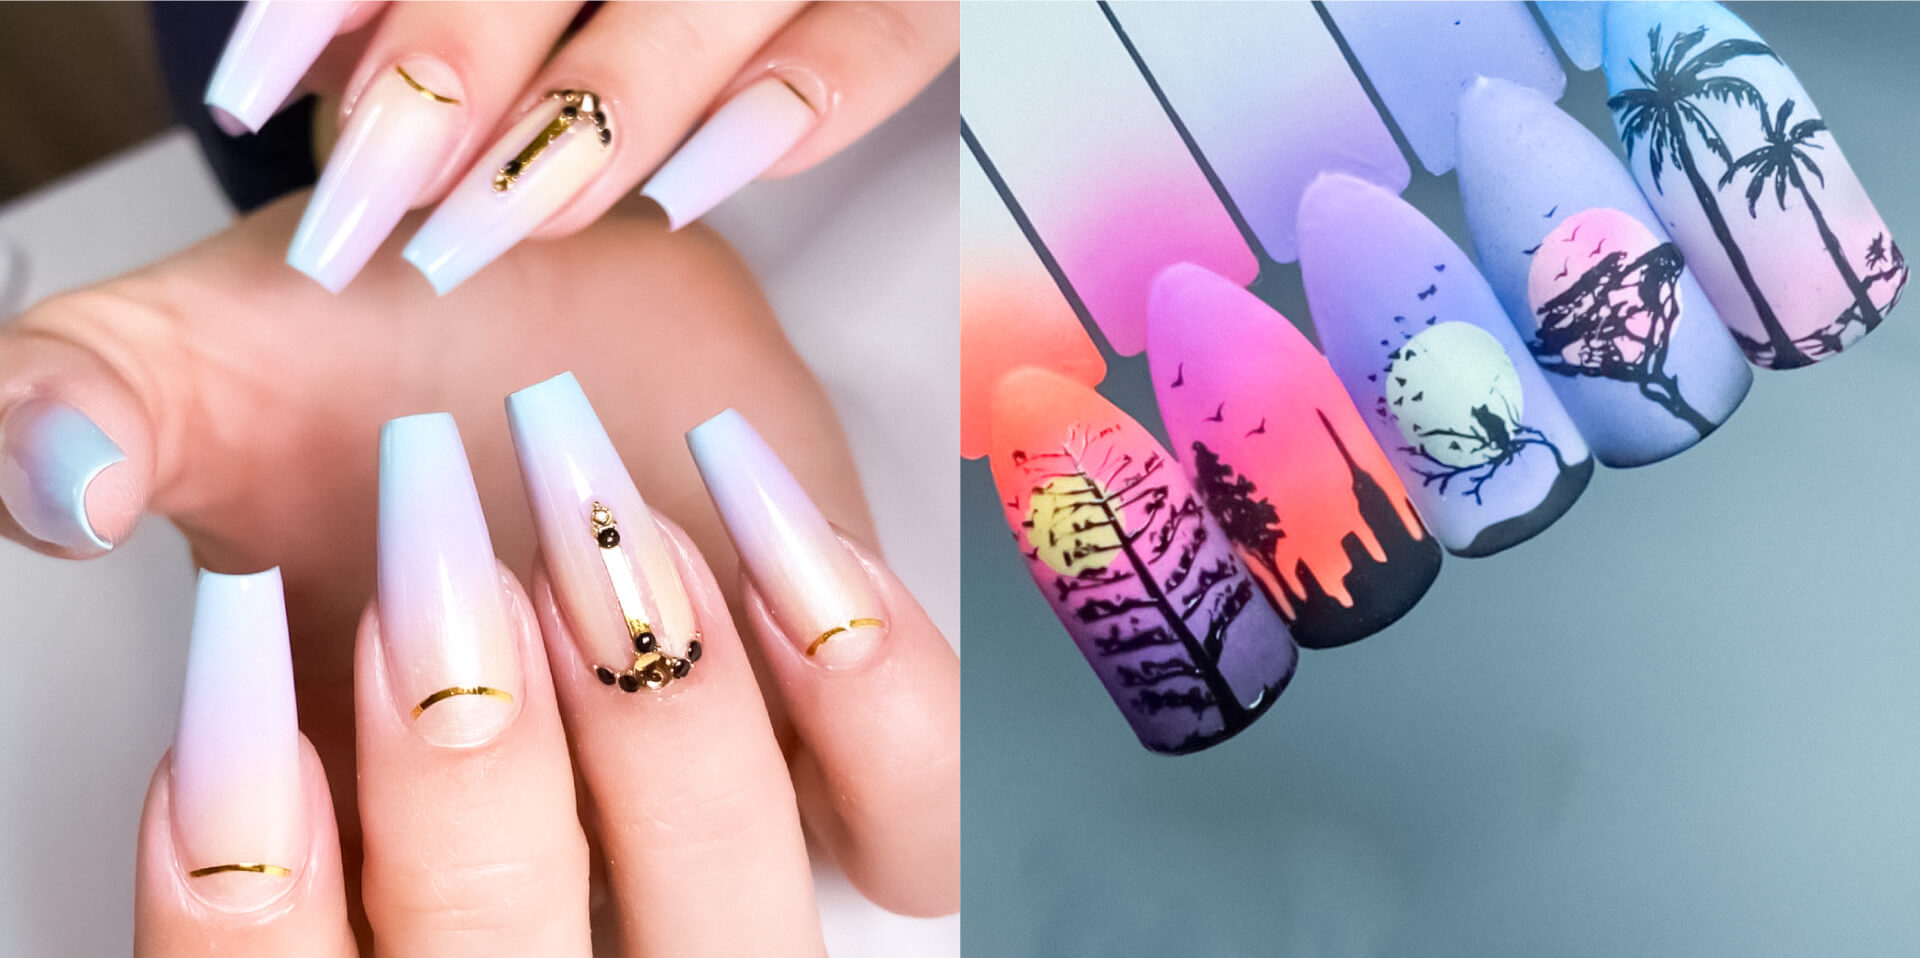 Airbrush Nail Art Course and Training